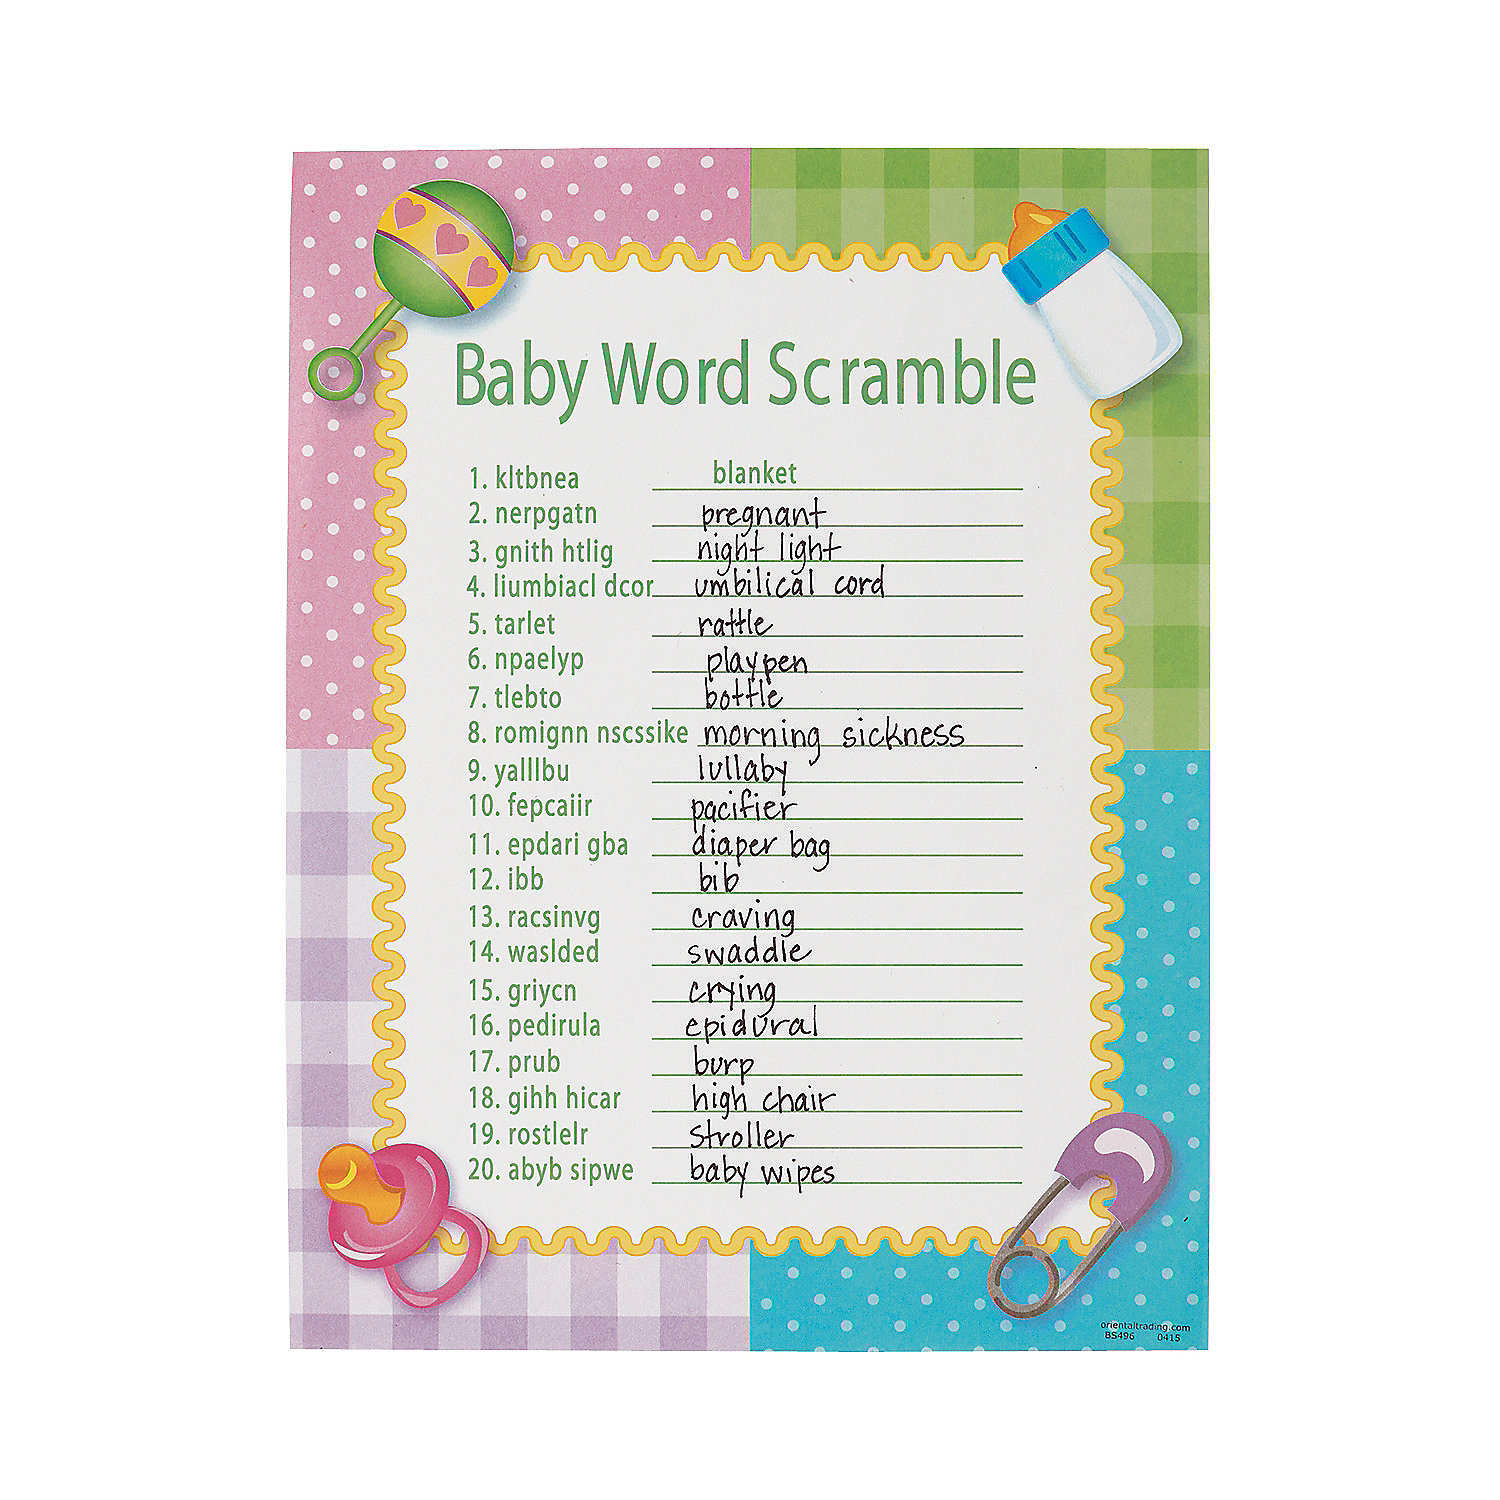 baby-shower-word-scramble-game-toys-24-pieces-887600666085-ebay